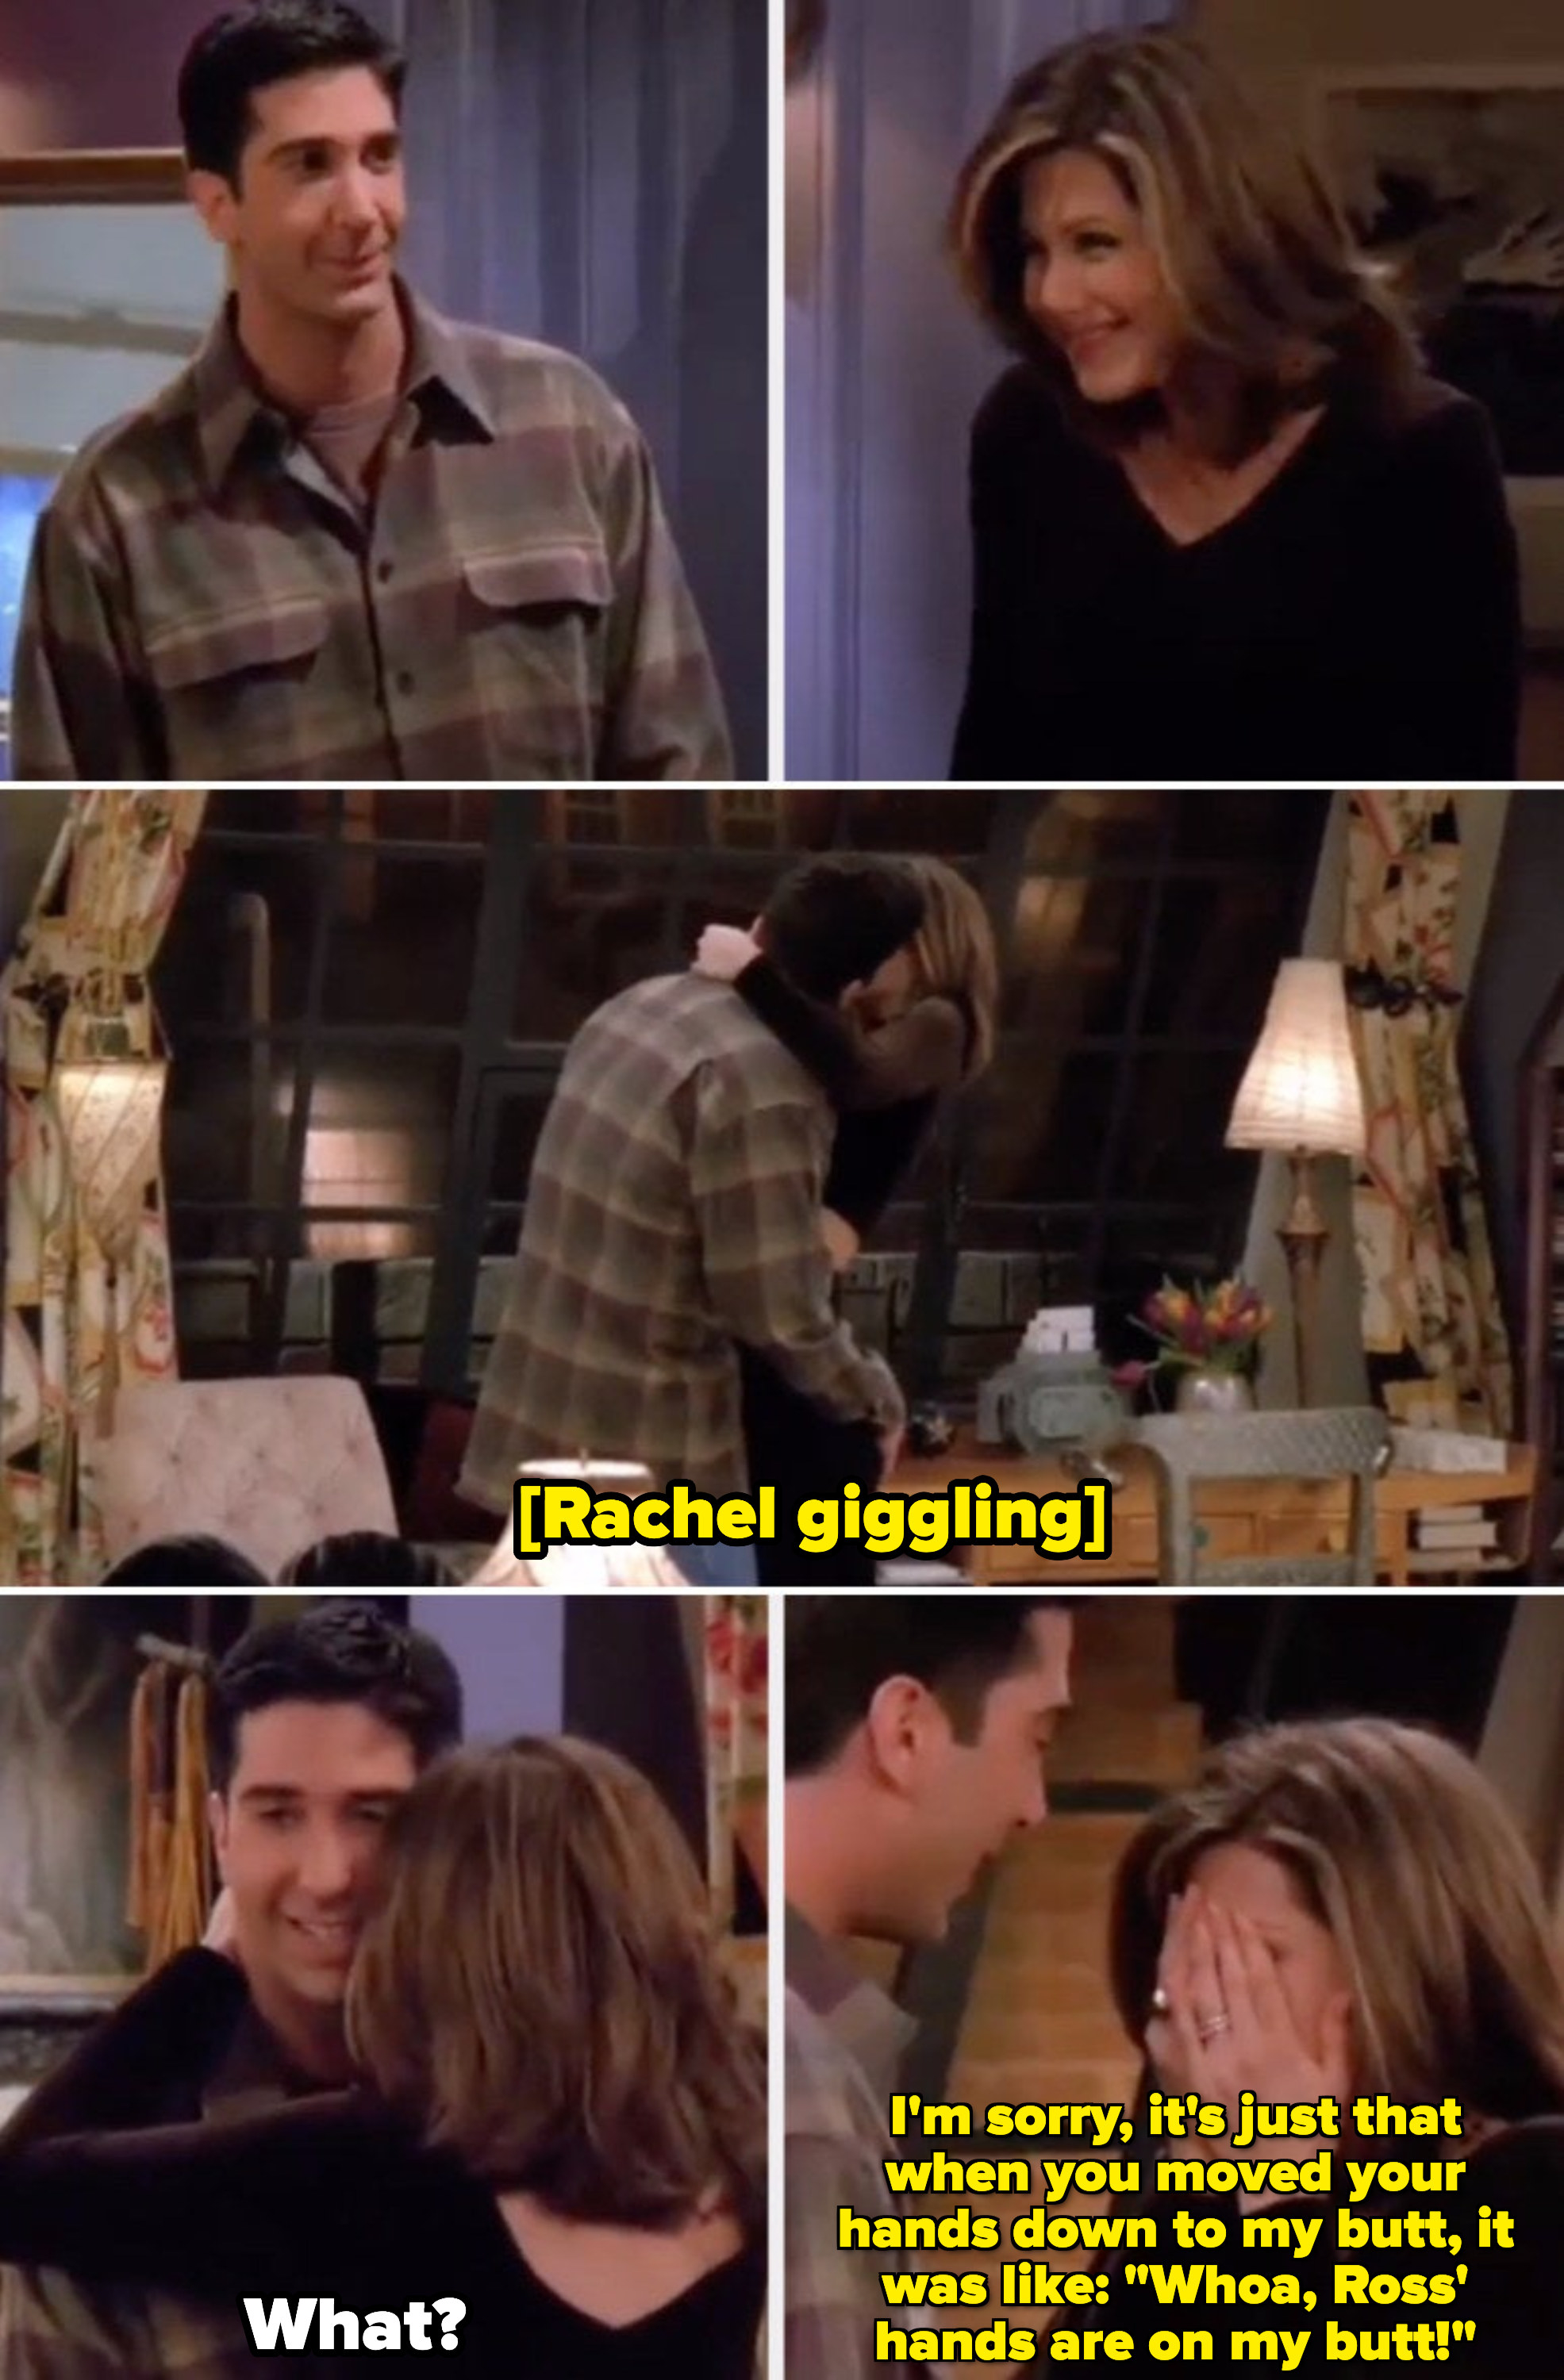 Rachel giggling when Ross&#x27; hands go down to her butt, saying: &quot;I&#x27;m sorry, it&#x27;s just that when you moved your hands down to my butt, it was like: &#x27;Whoa, Ross&#x27; hands are on my butt!&#x27;&quot;